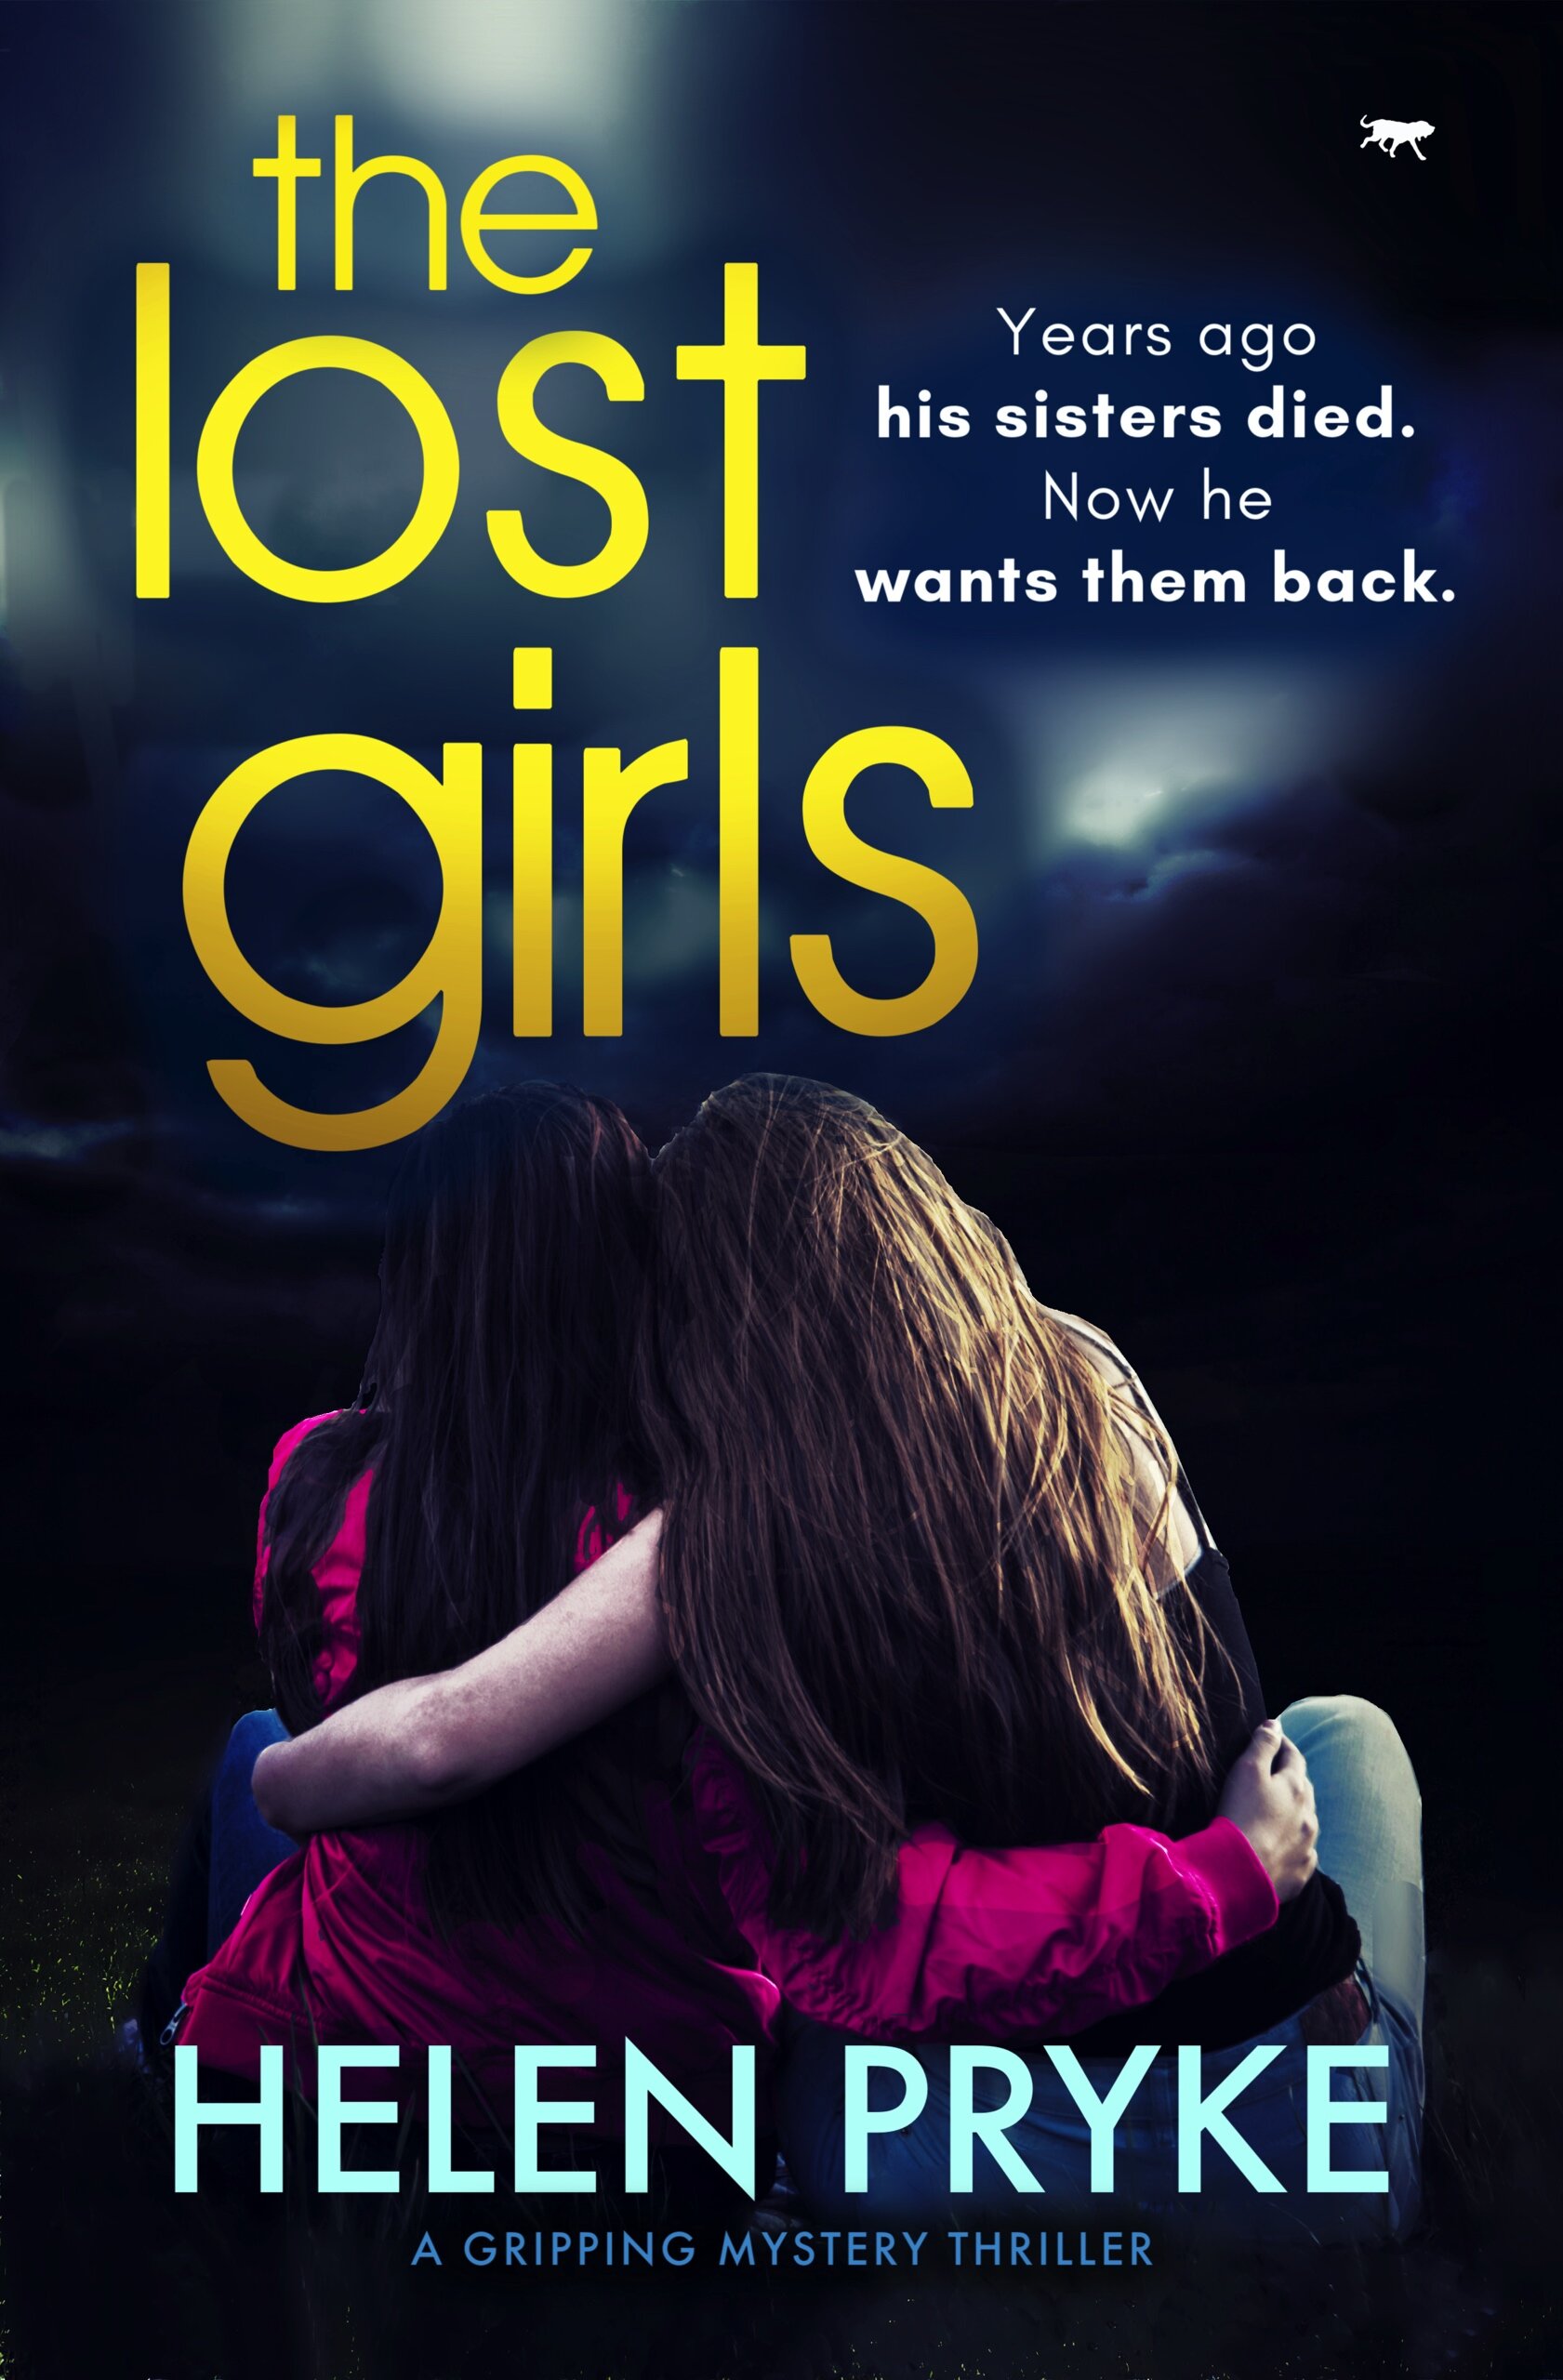 The-Lost-Girls-Kindle.jpg